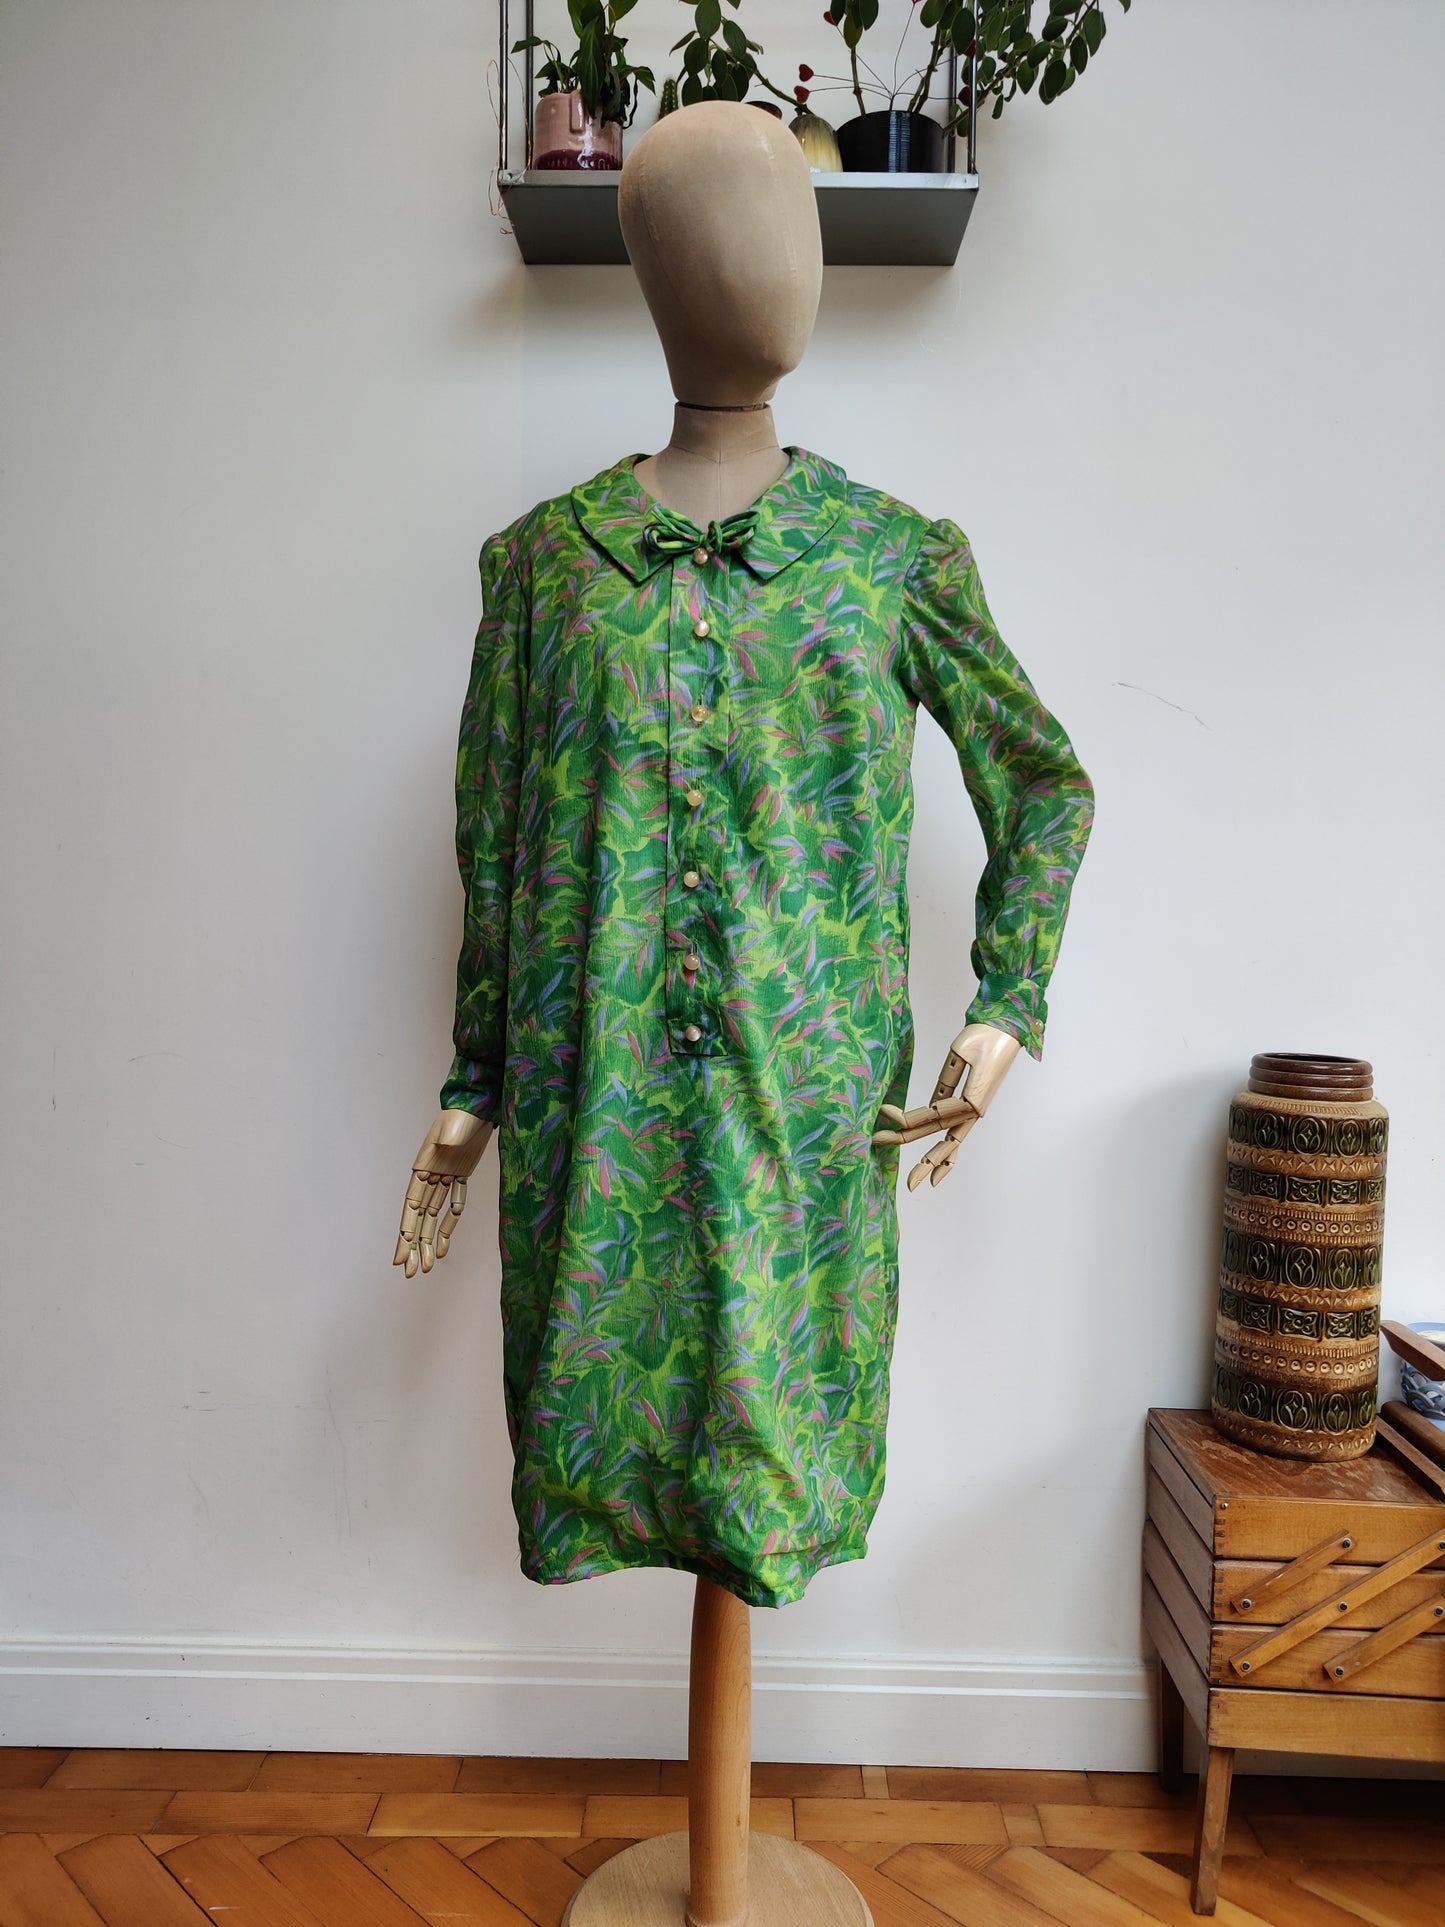 60's mod dress in pink and green floral print